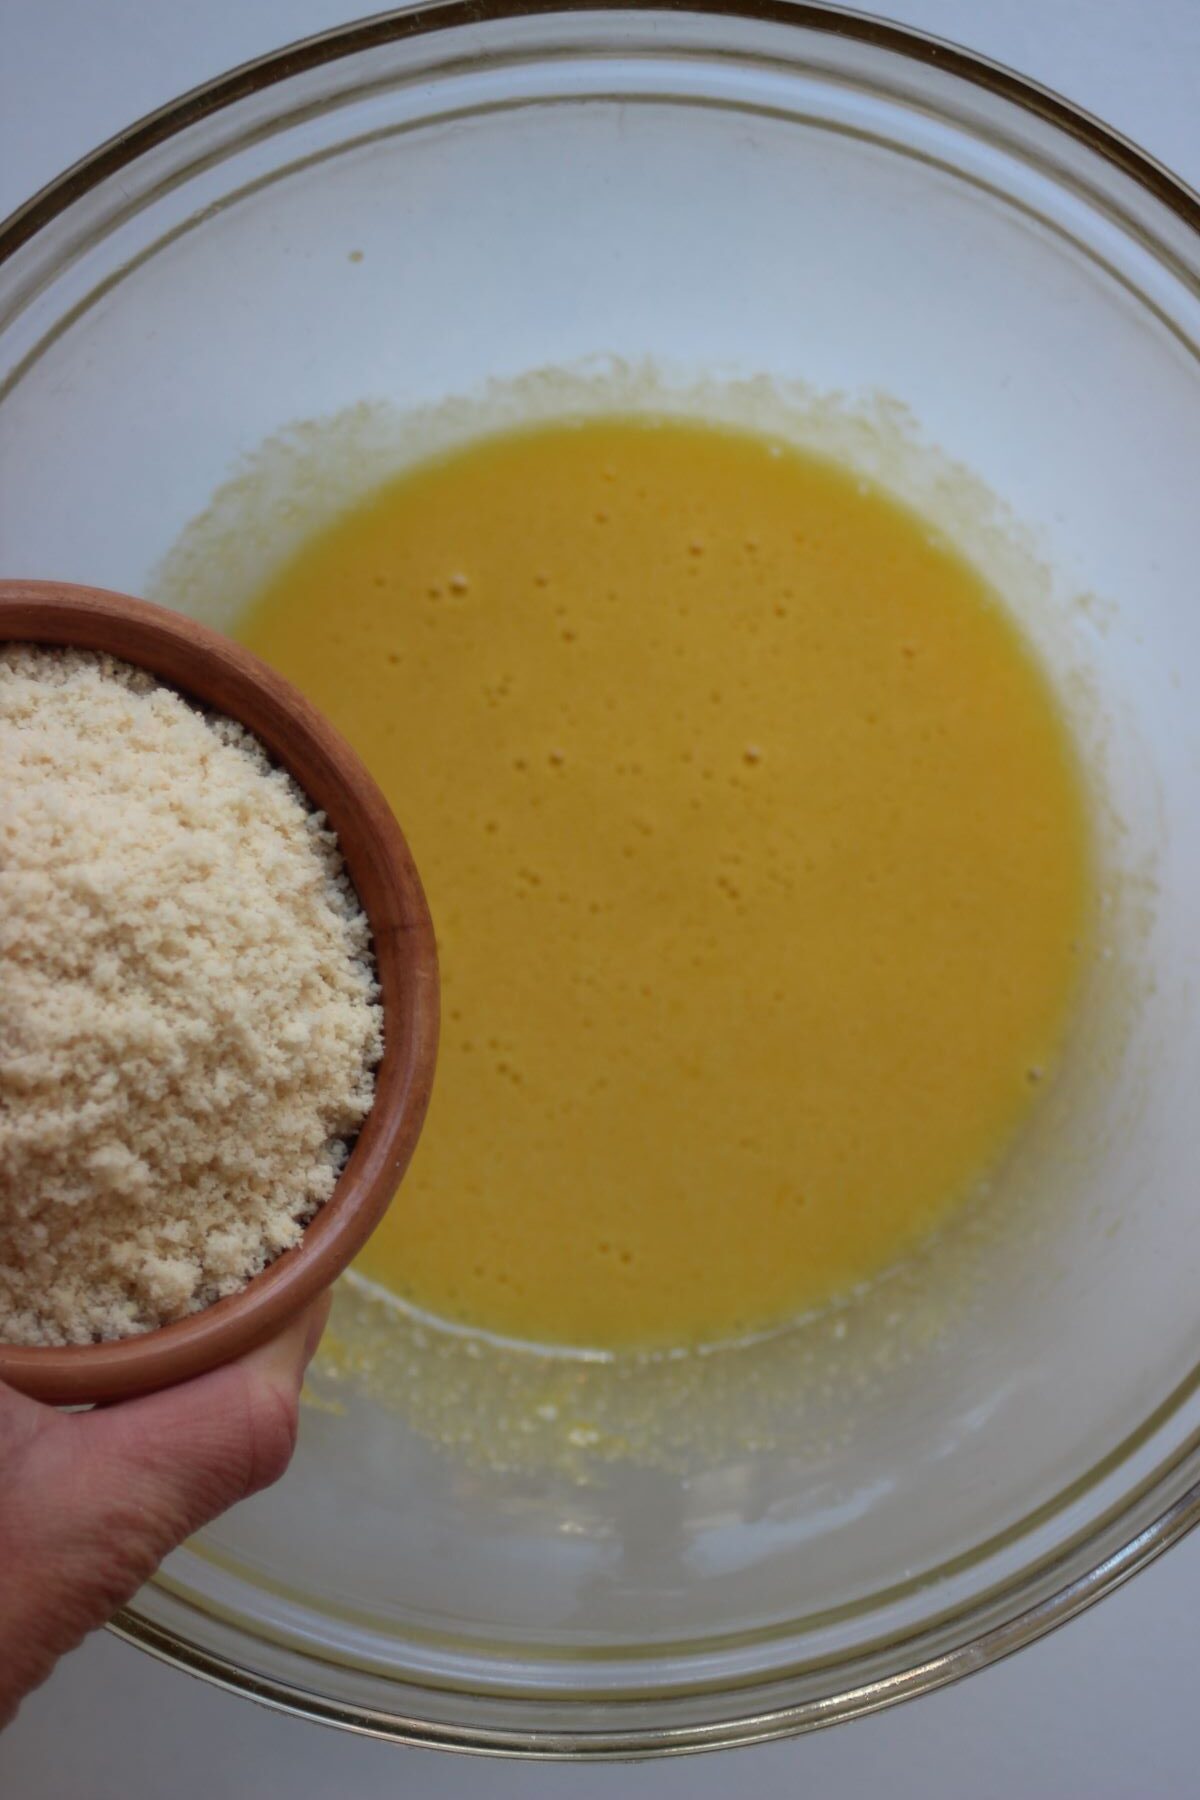 Bowl with almond flour is about to be poured into glass bowl with yellow mixture.